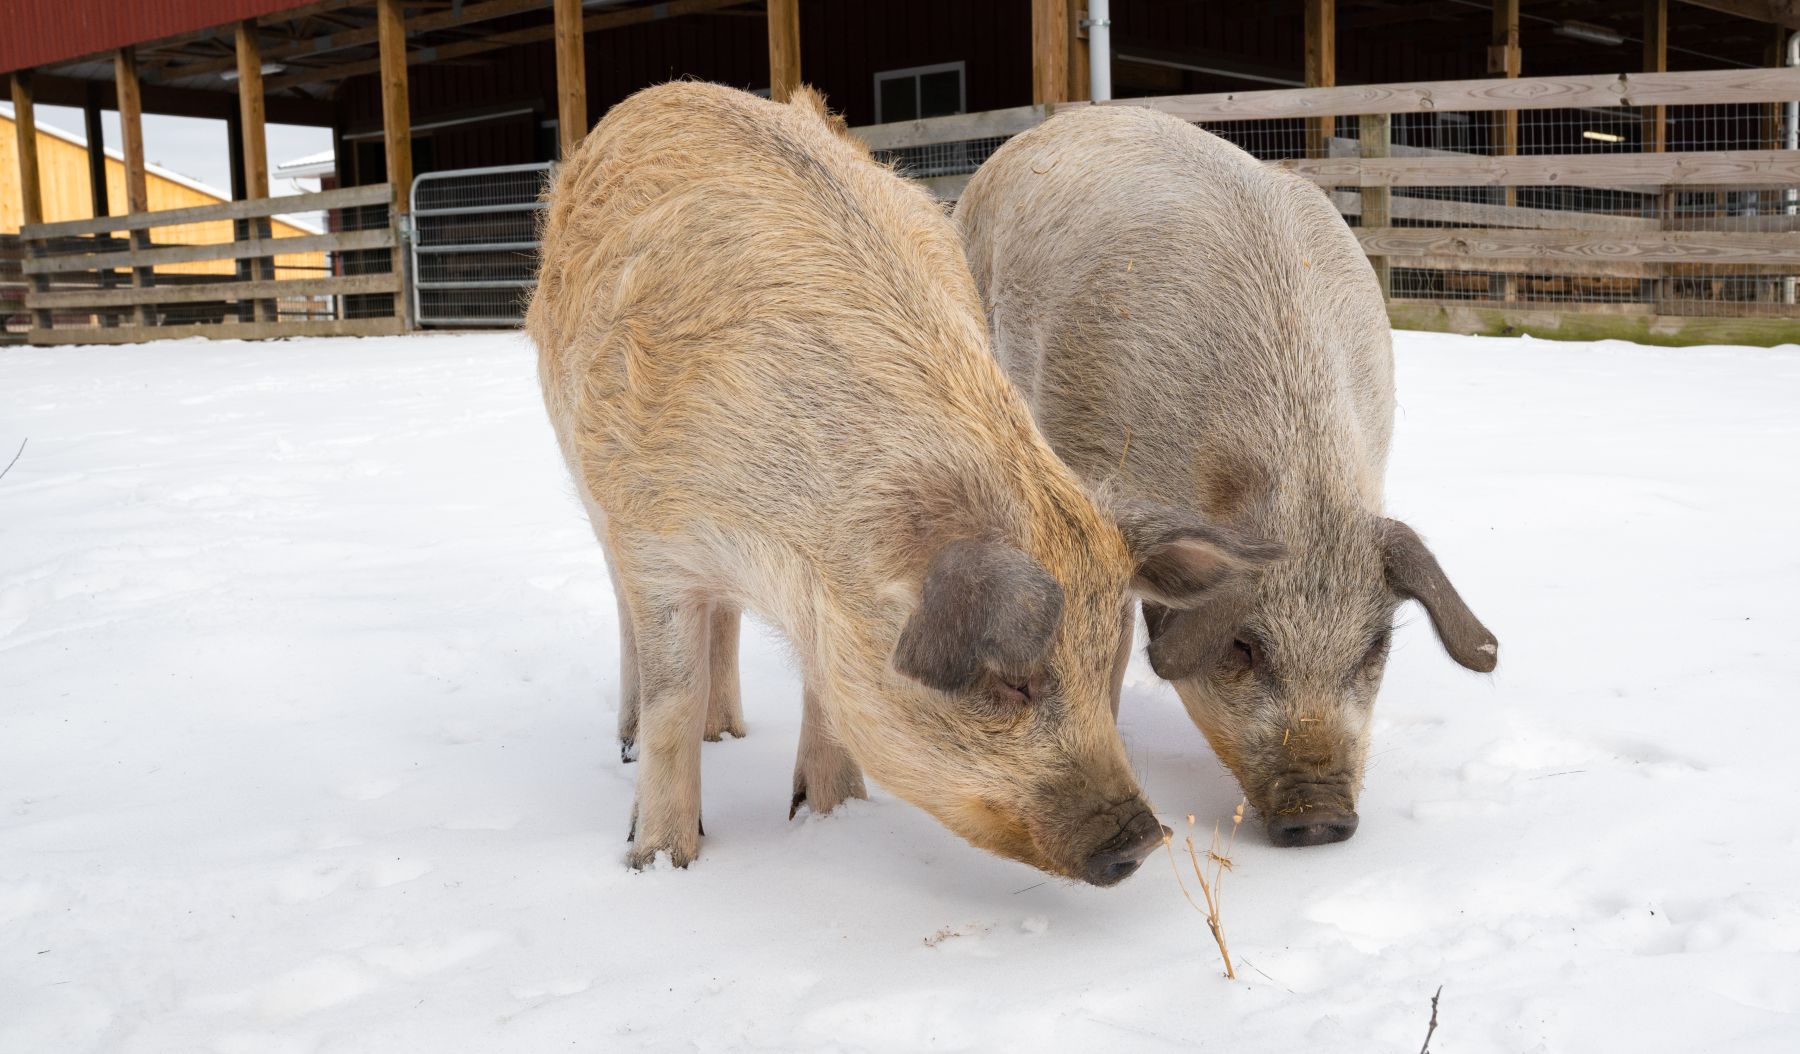 Robbie and Lizzie in the snow at Farm Sanctuary